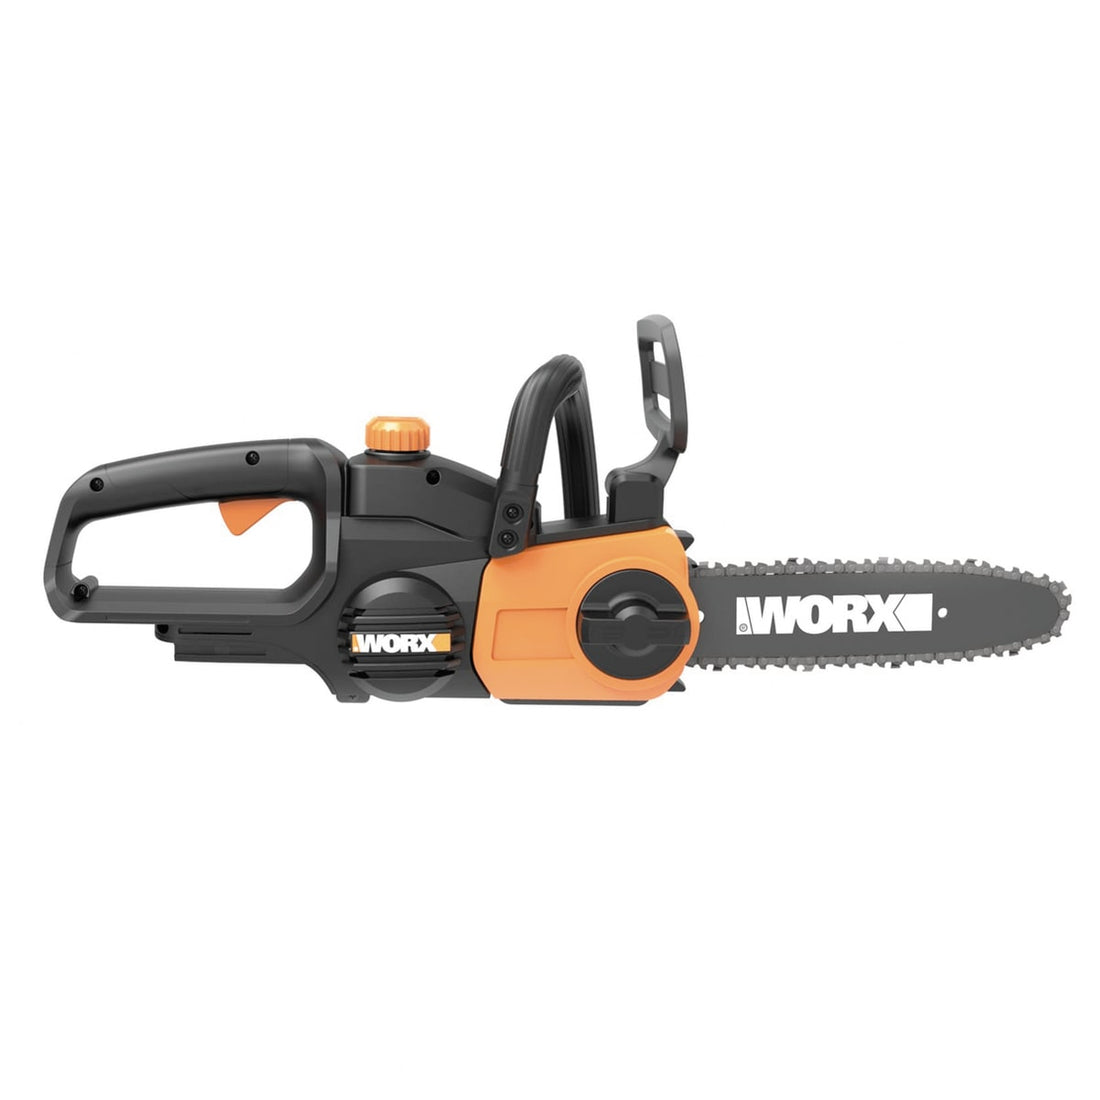 20V ELECTRIC SAW - 25CM BLADE WITHOUT BATTERY AND CHARGER